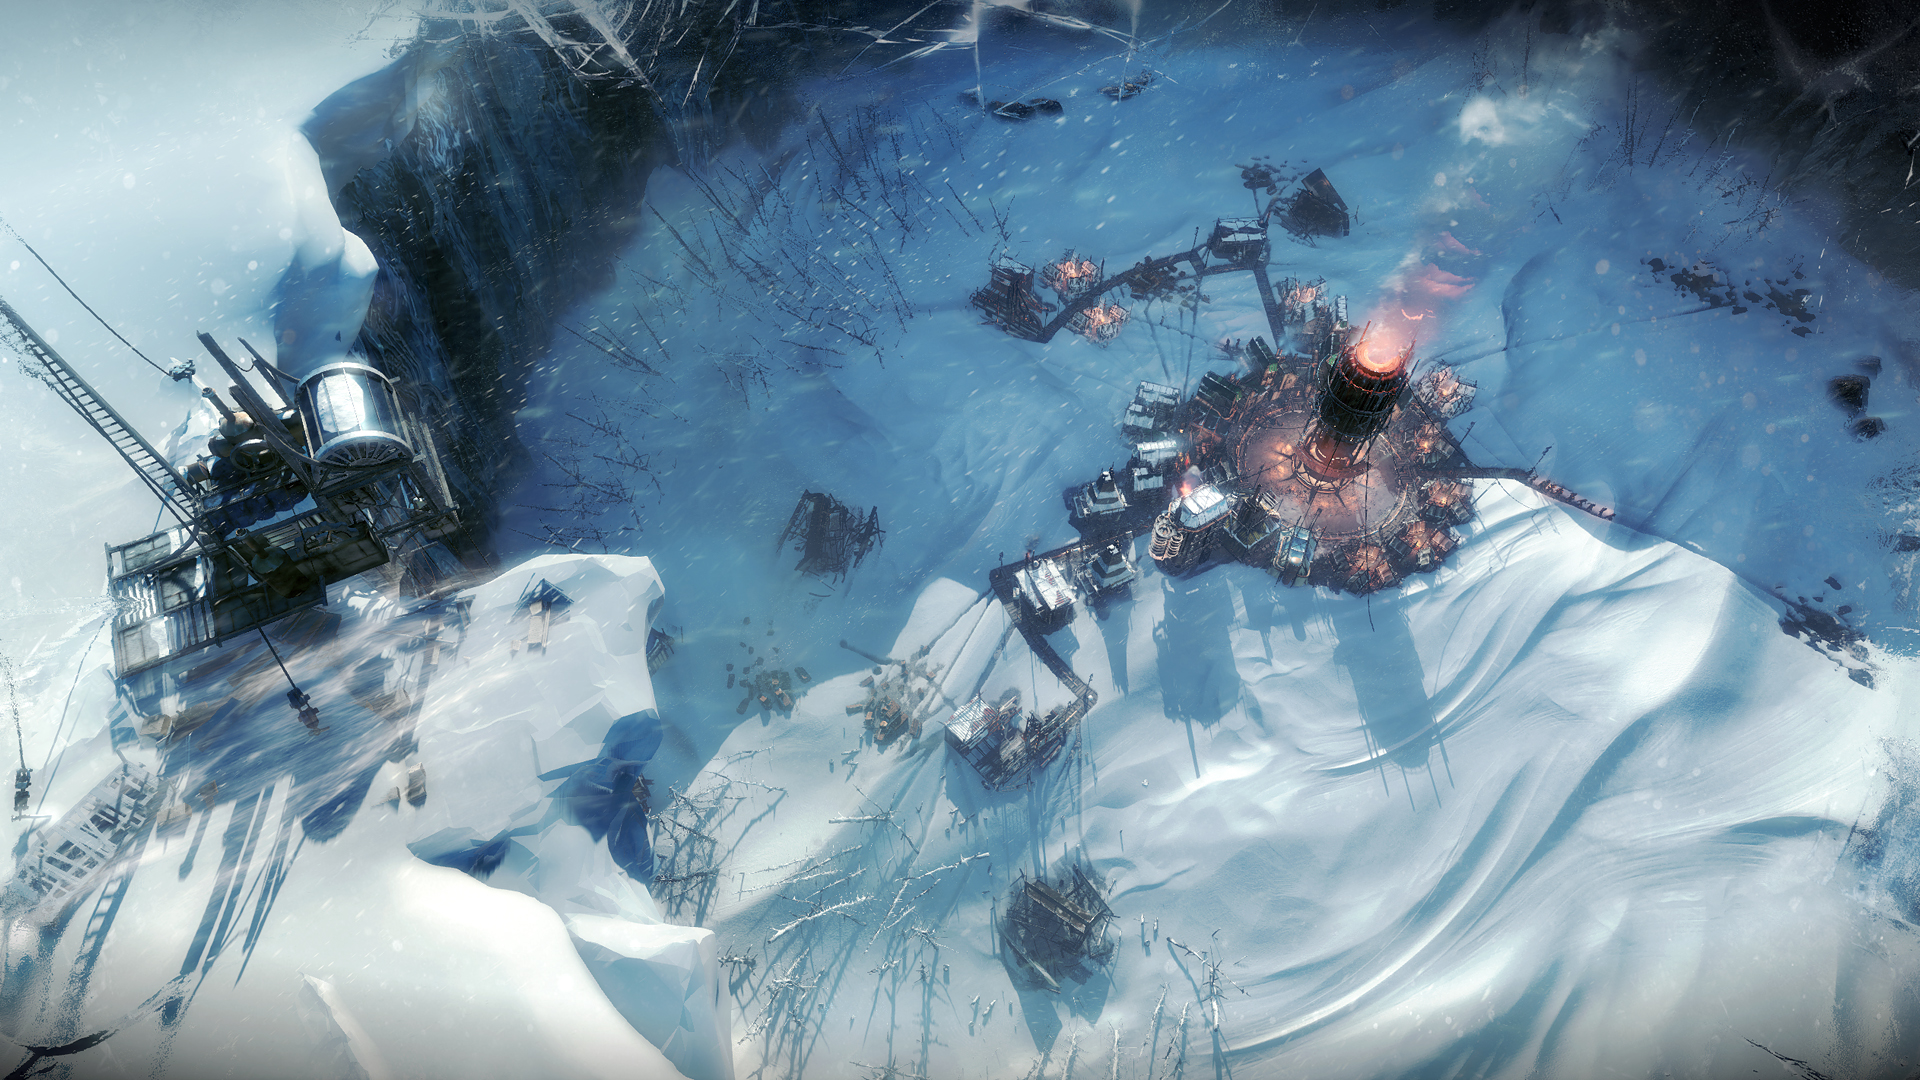 Free Frostpunk The Fall of Winterhome Expansion Lands This Week